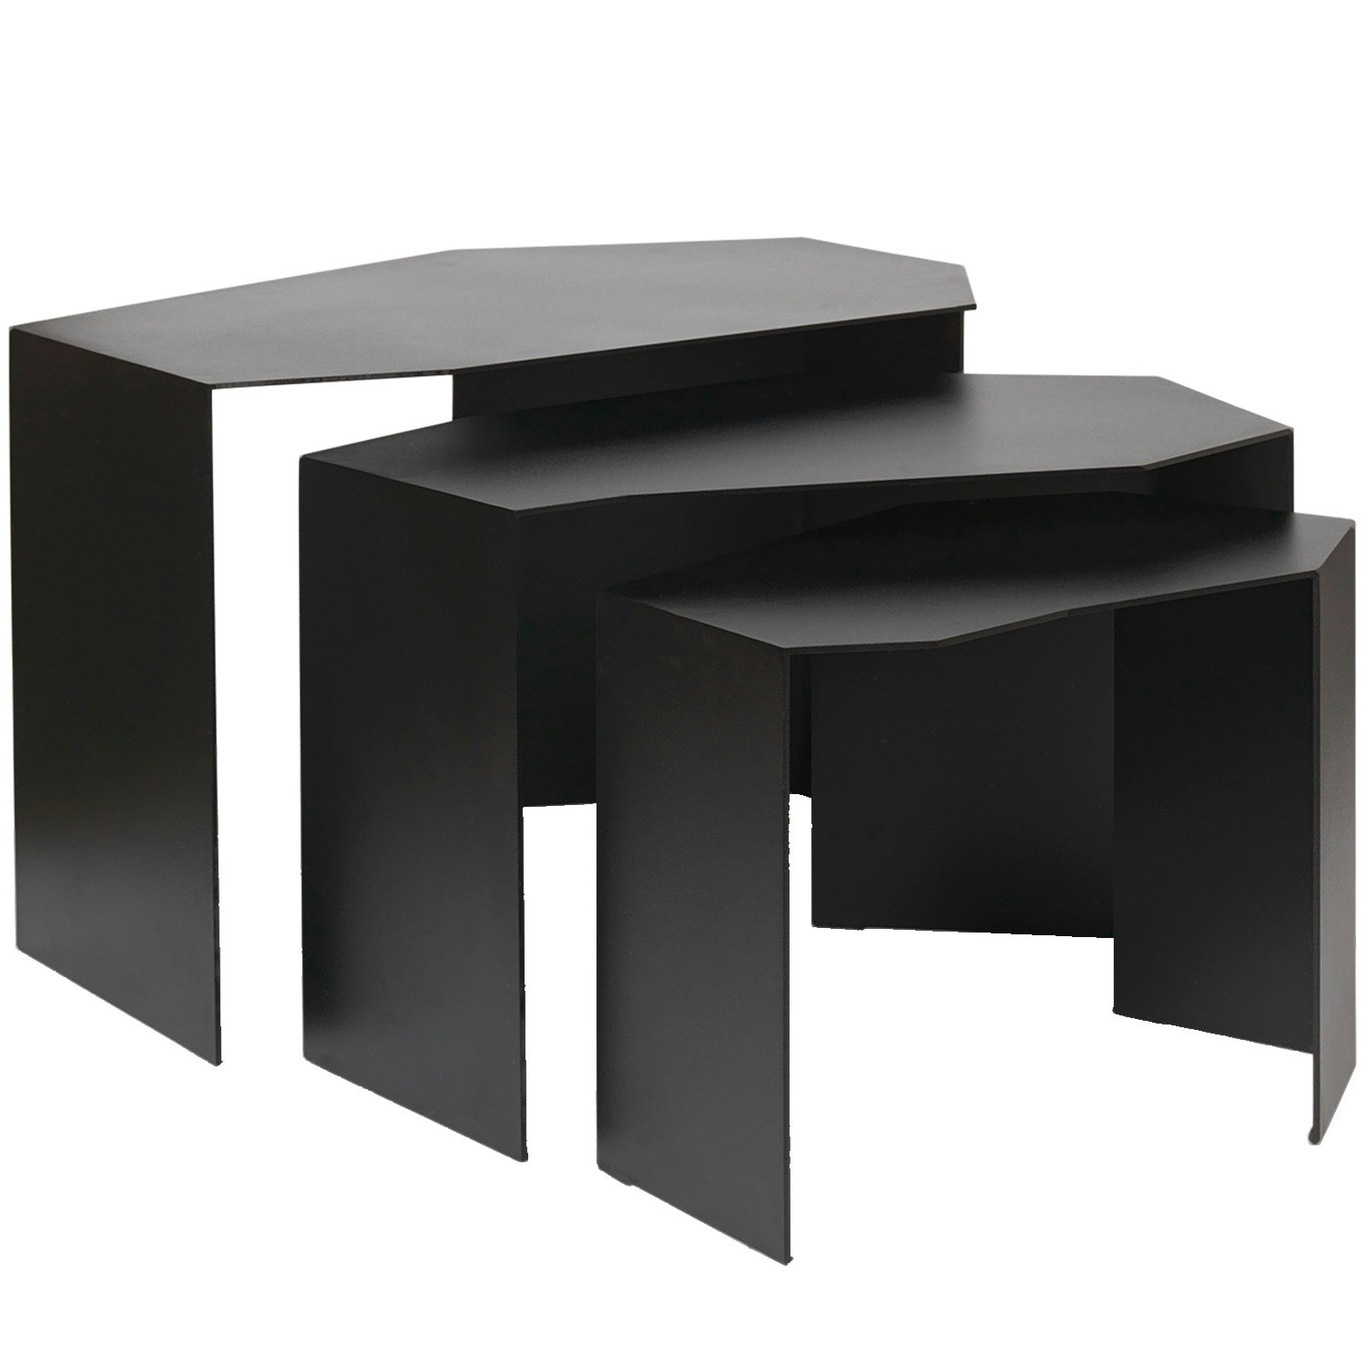 Shard Cluster Coffee Table 3 Pieces, Black